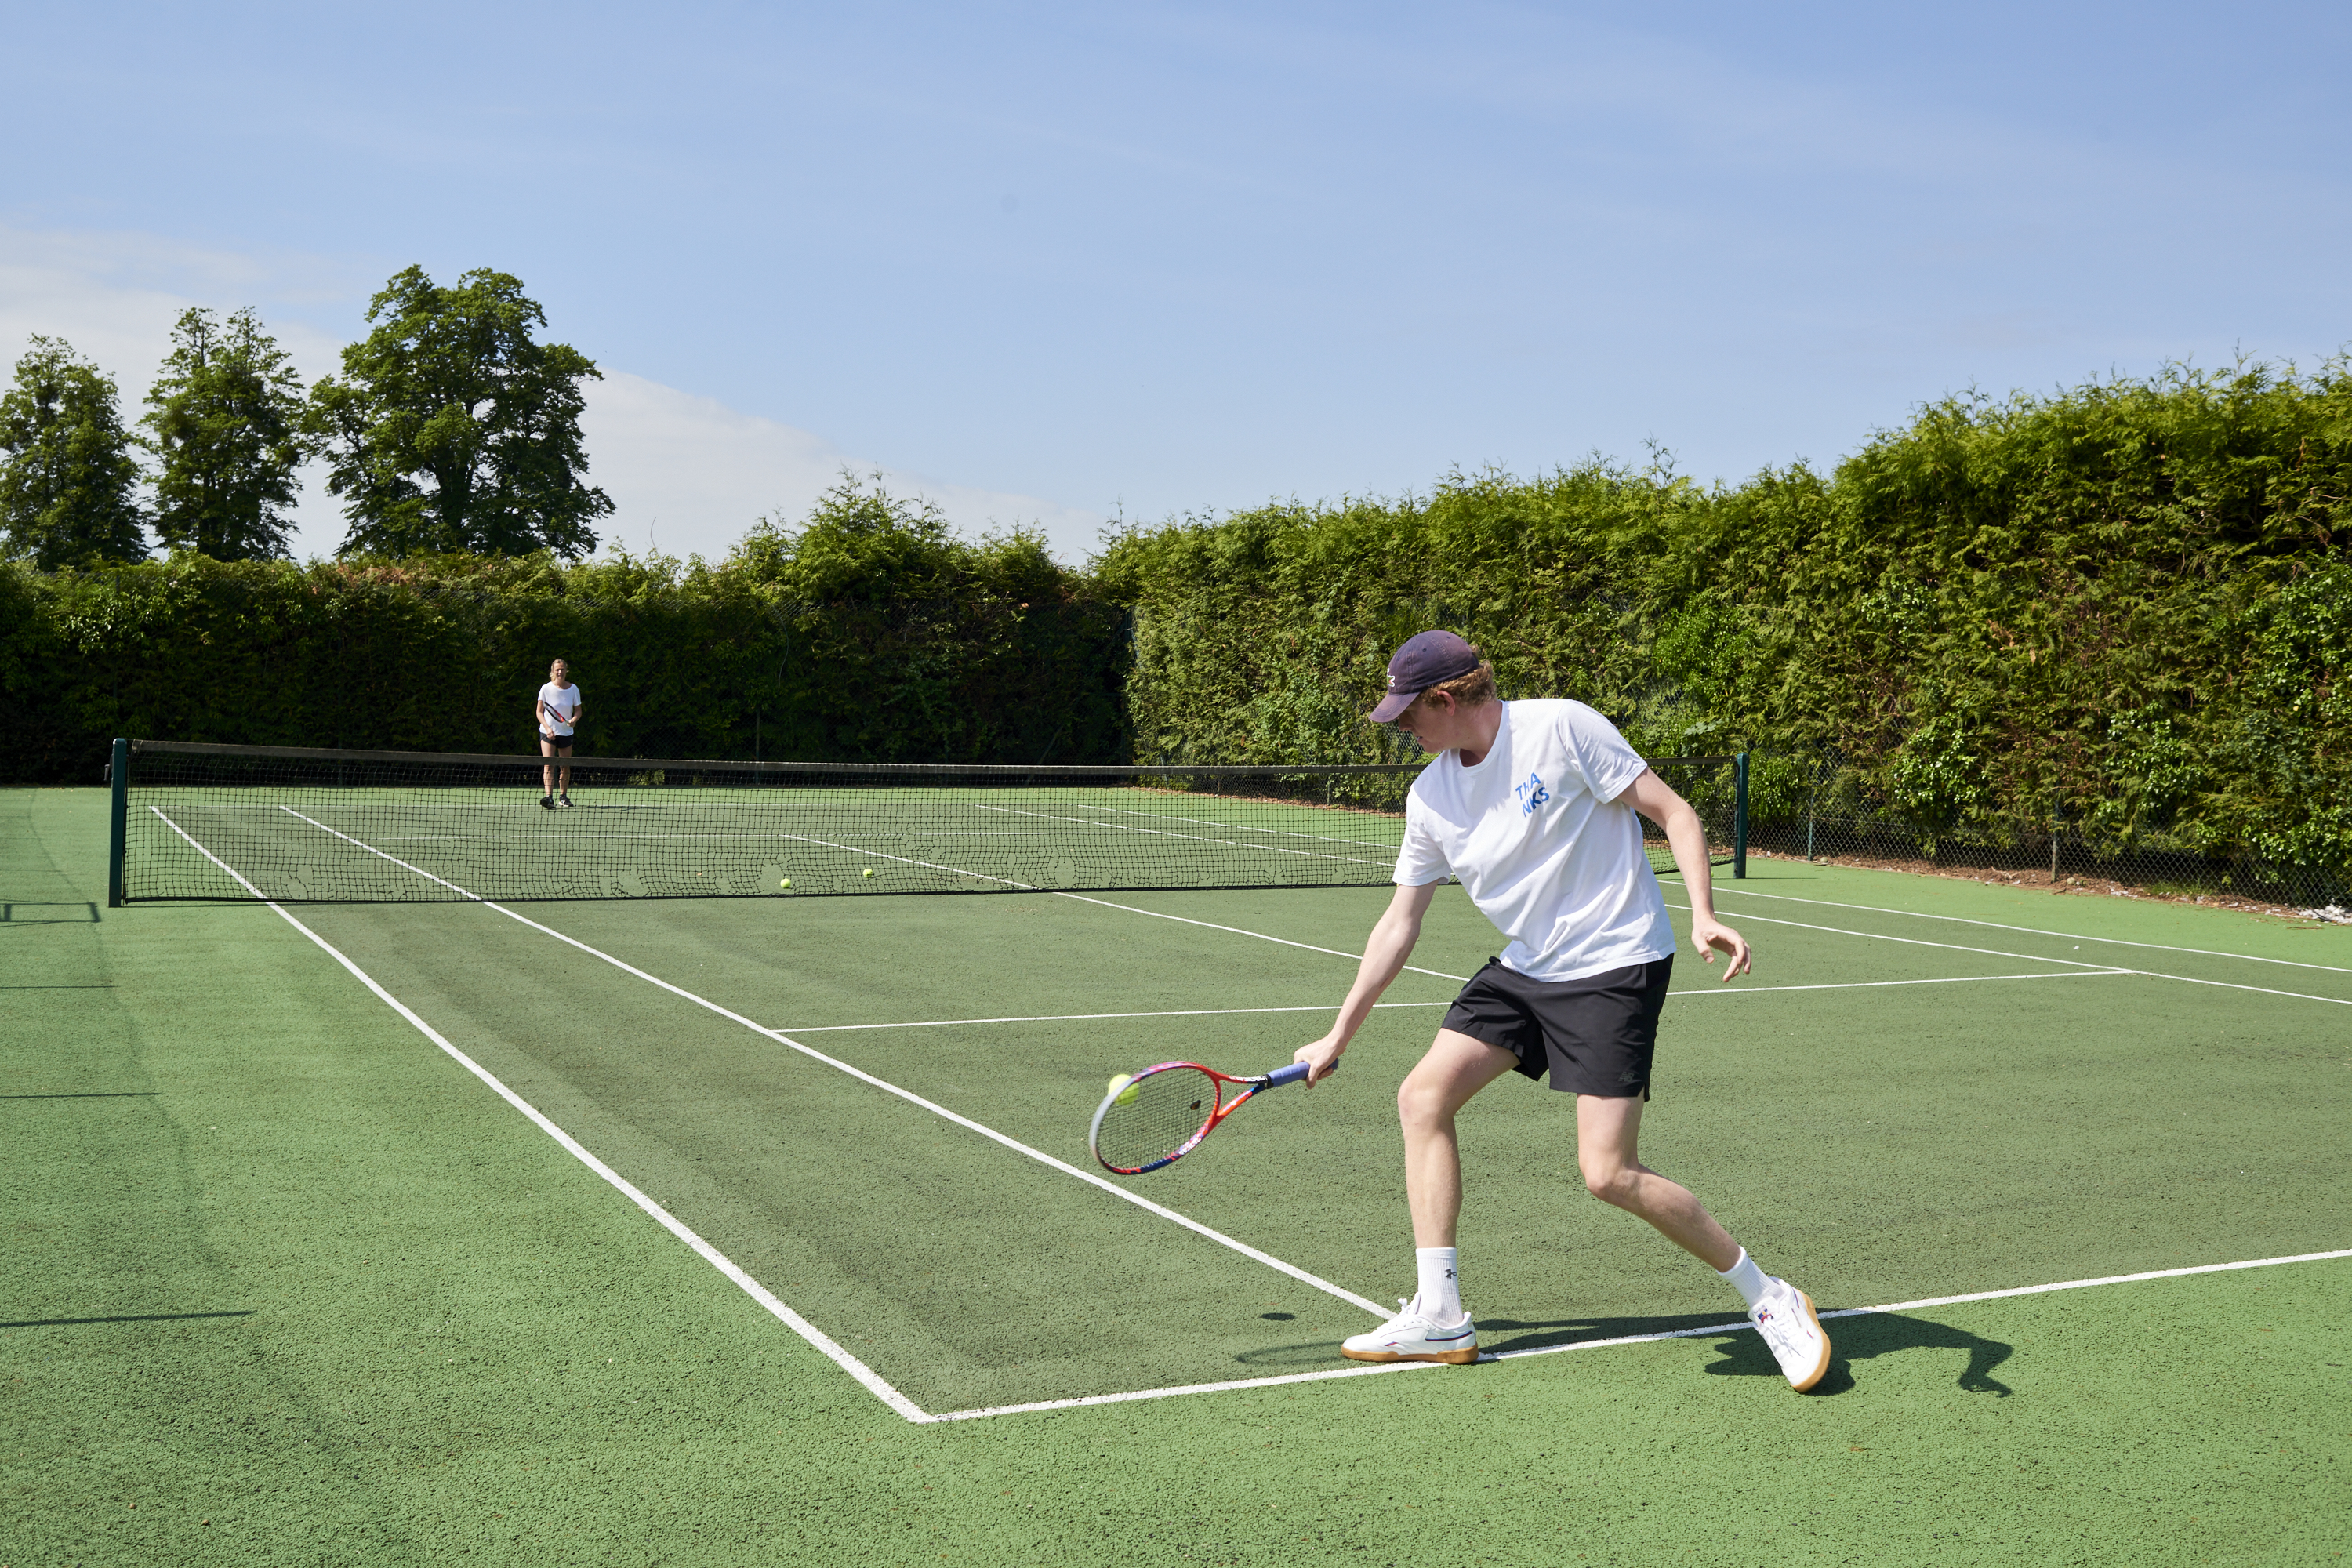 Private tennis court at Grendon Court